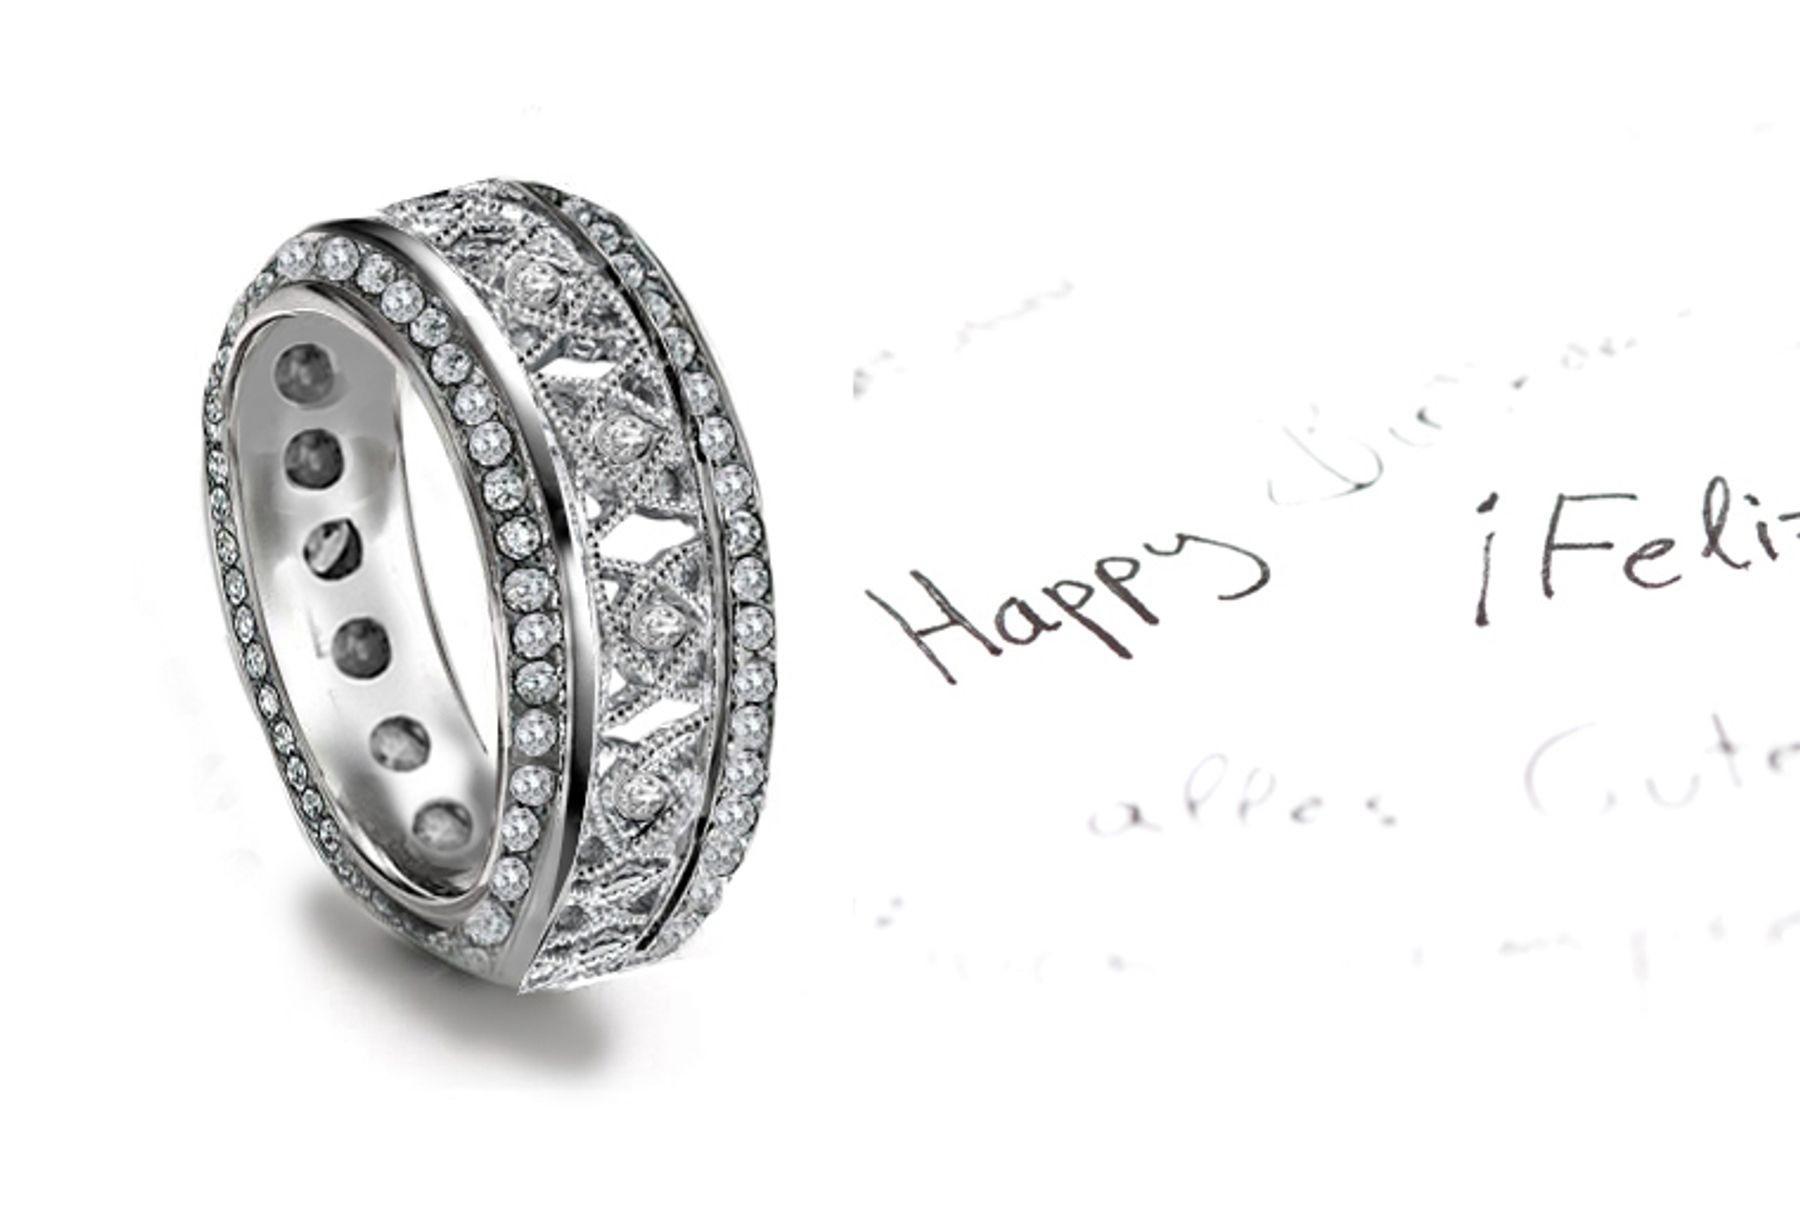 Amazing: Wide Diamond Open Work Band Diamond Set in Filigree 90o Titled Square Frame All Around